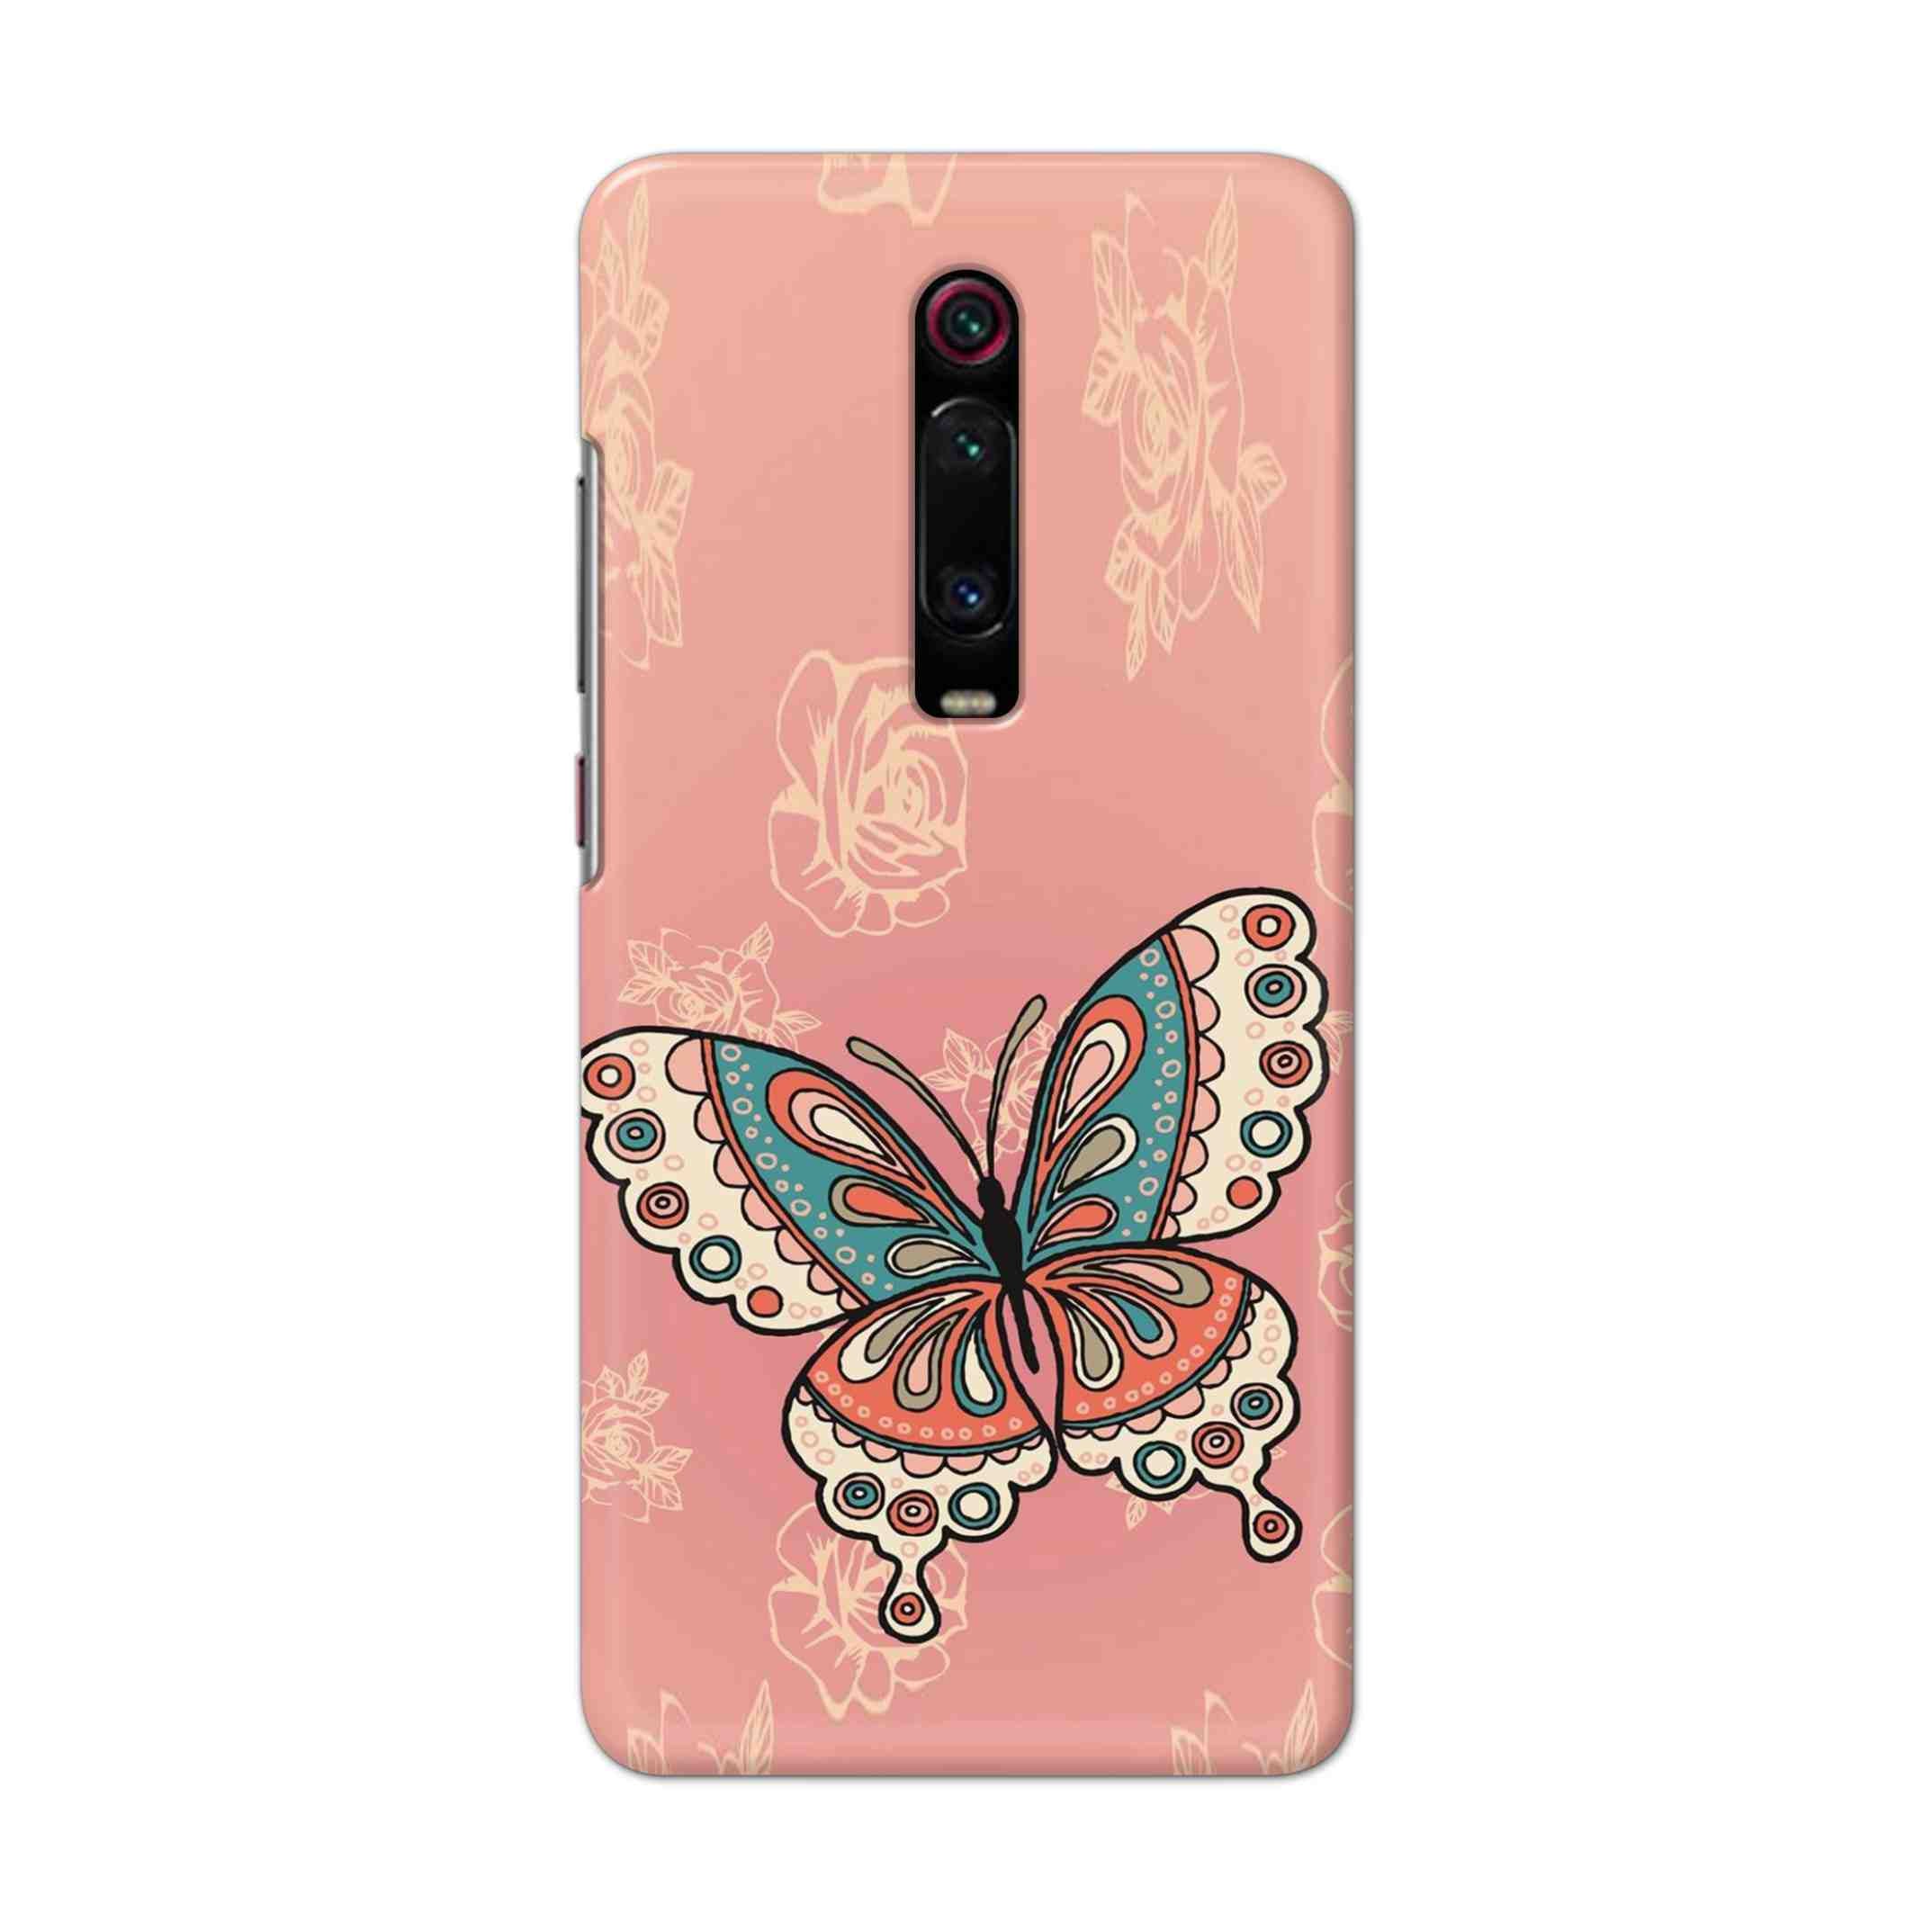 Buy Butterfly Hard Back Mobile Phone Case Cover For Xiaomi Redmi K20 Online